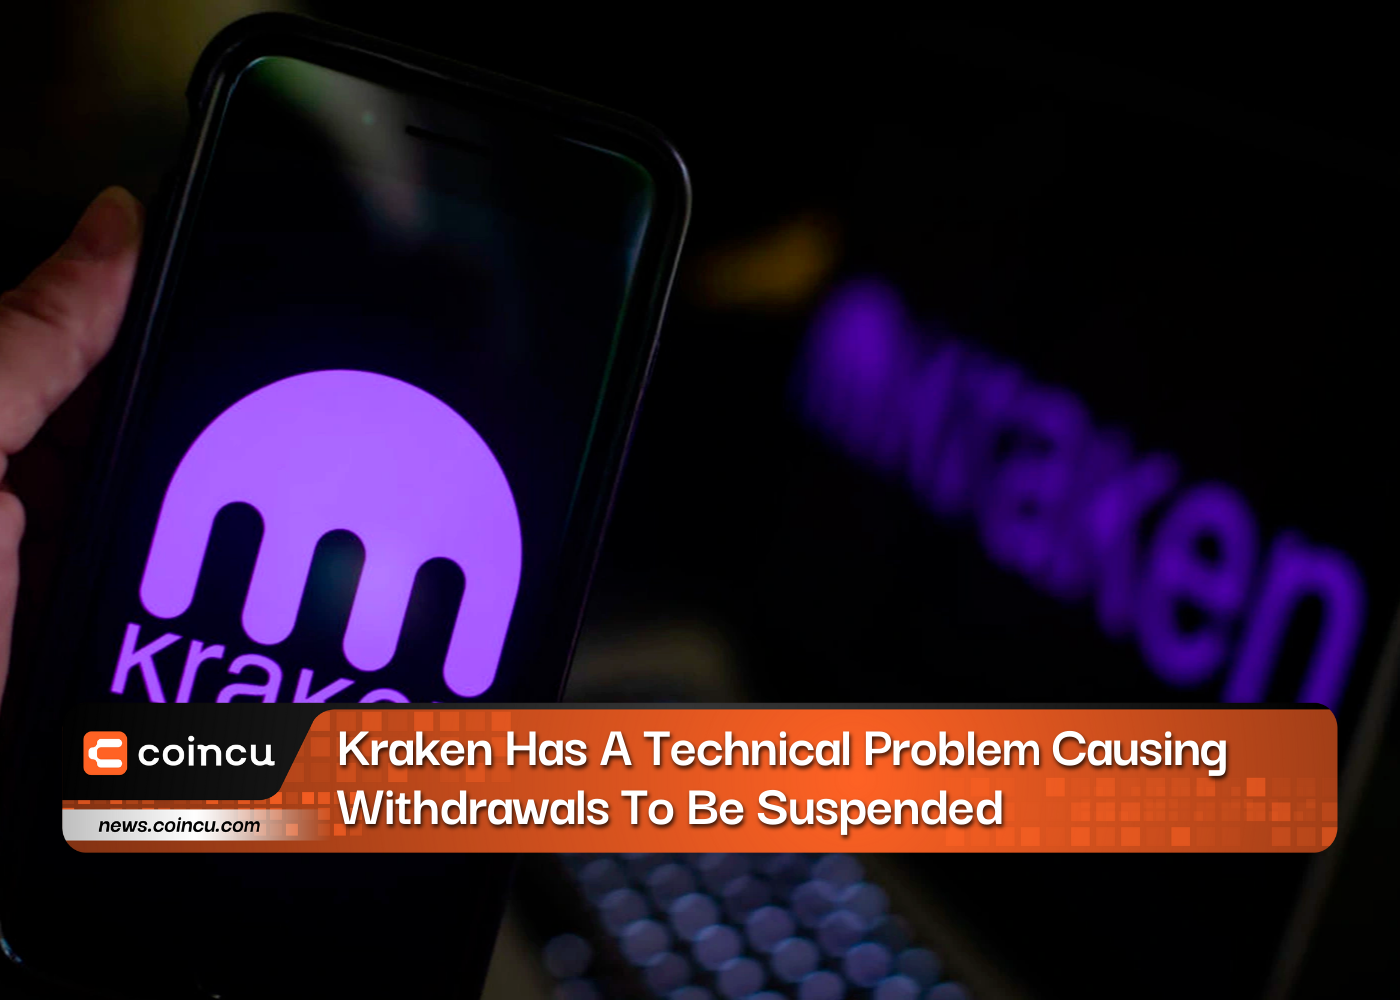 Kraken Has A Technical Problem Causing Withdrawals To Be Suspended